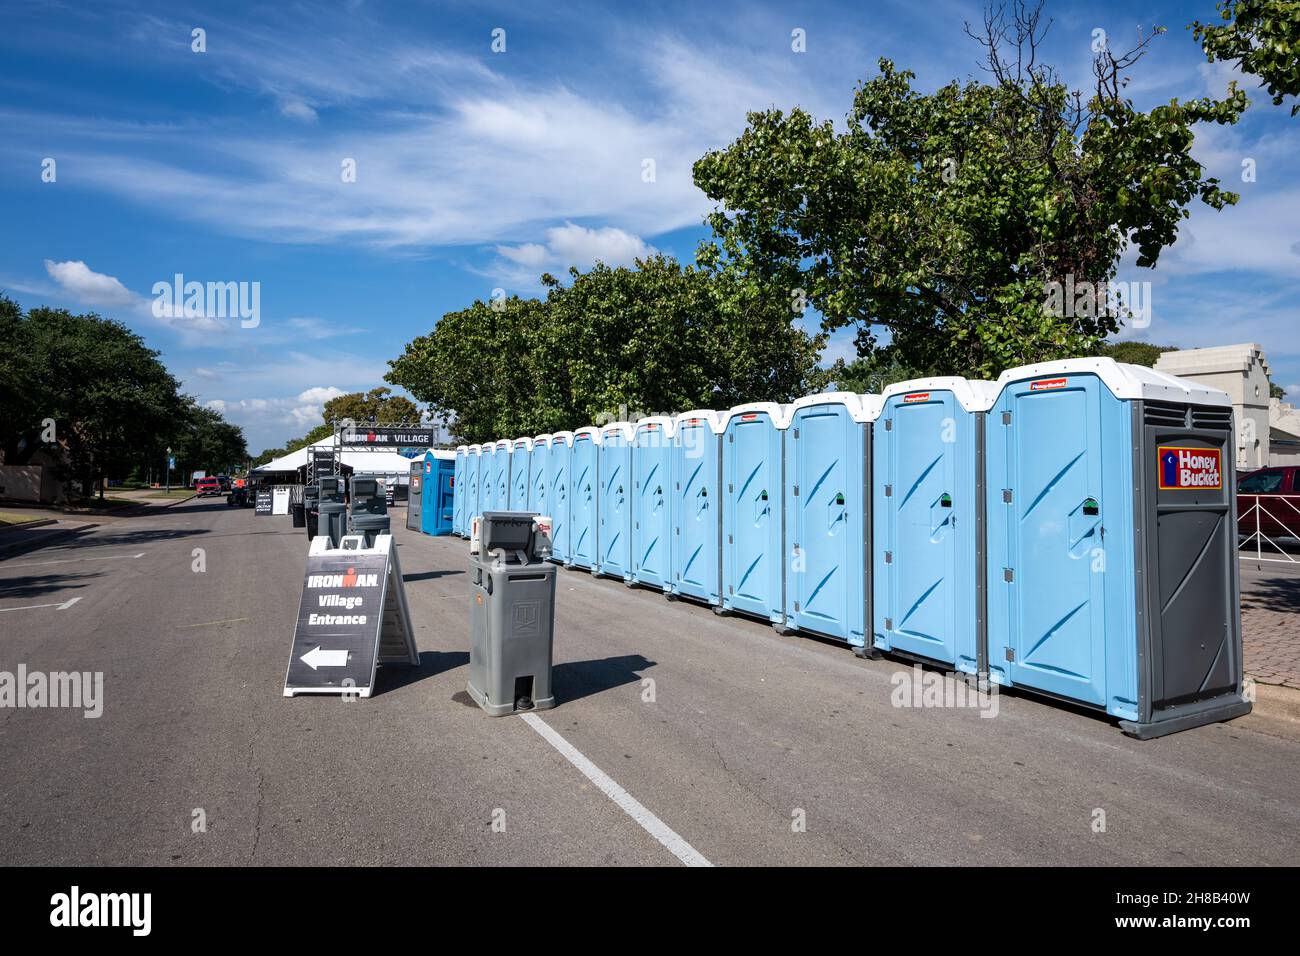 Waco, Texas - Oct. 21, 2021: Portable toilets and wash stations are set up at the IRONMAN Village for the inaugural Ironman Waco event October 23 and 24. Stock Photo